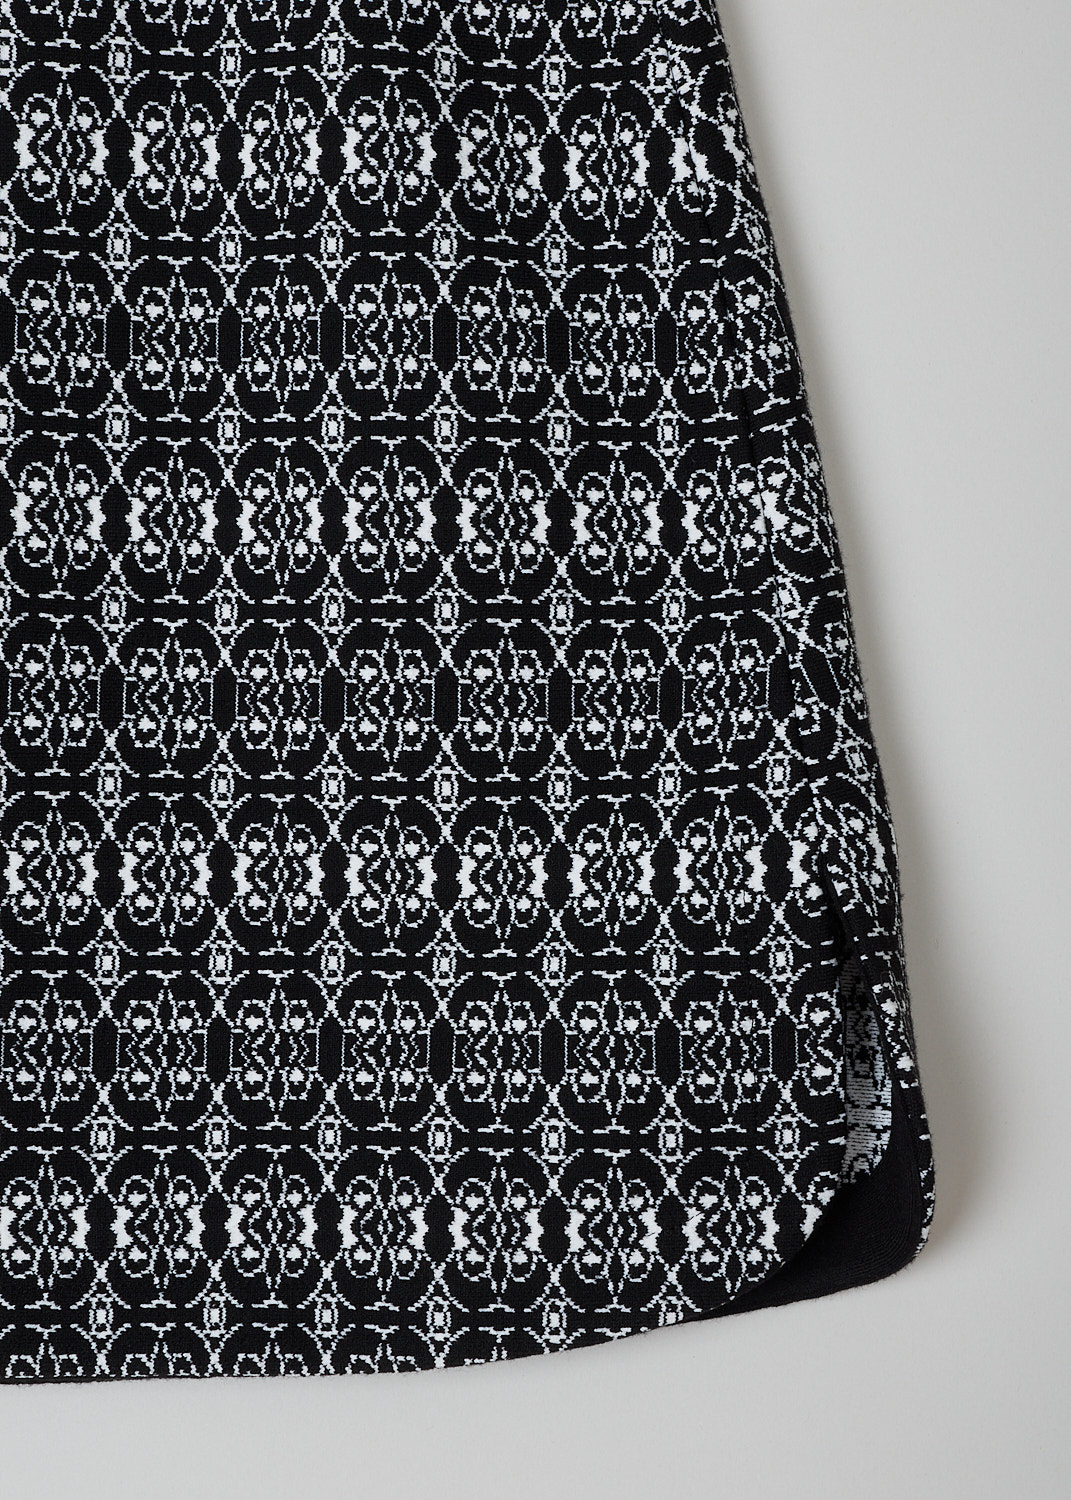 ALAÏA, BLACK AND WHITE PRINTED SKIRT, 8W9JD82CM408_JUPE_ALHAMBRA, Black, White, Print, Detail, This black and white printed skirt is fully elasticated. A concealed side zip functions as the closure option. The skirt has a curved hemline with small slits.
